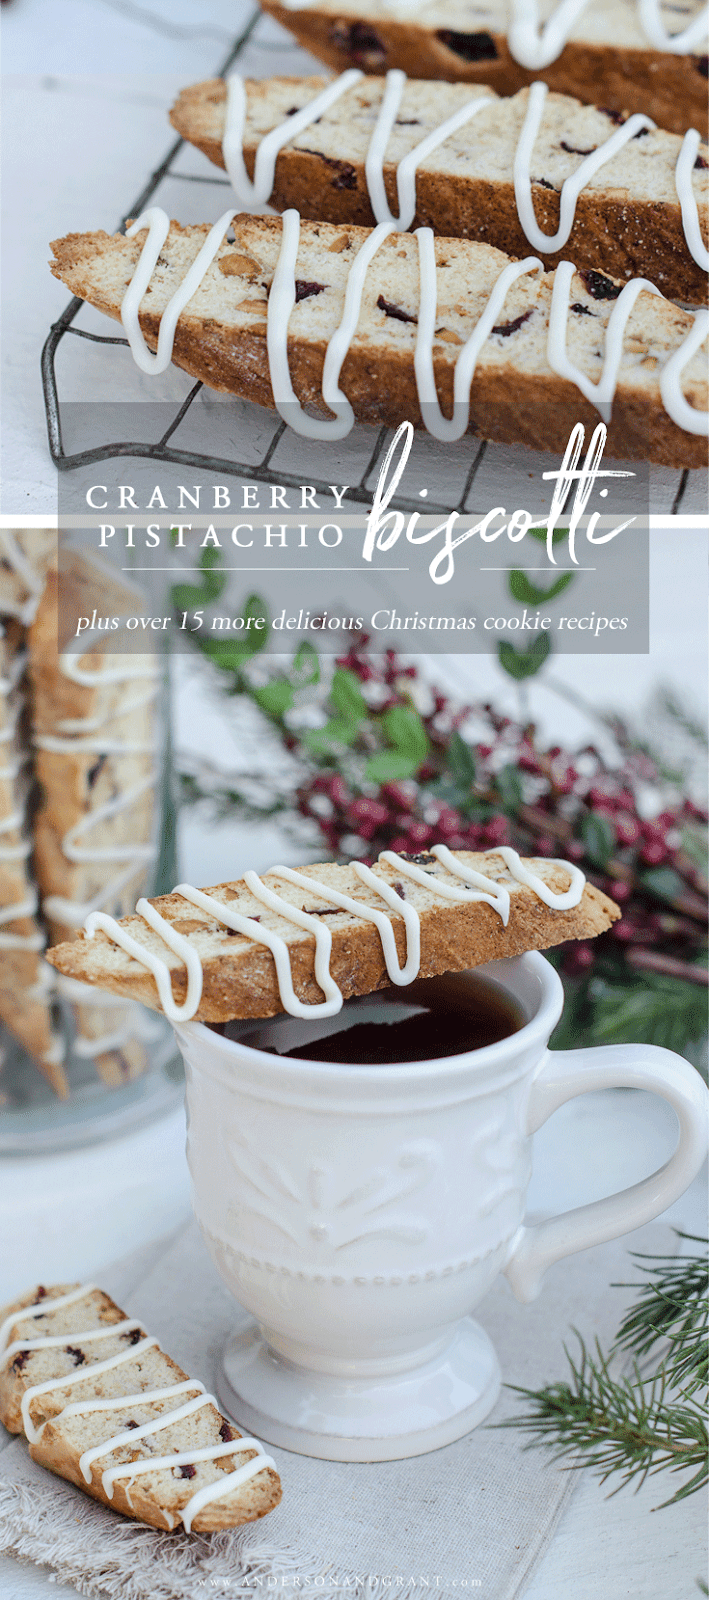 A simple and delicious Christmas cookie recipe for Cranberry Pistachio Biscotti plus over 15 more holiday baking recipes.  |  www.andersonandgrant.com